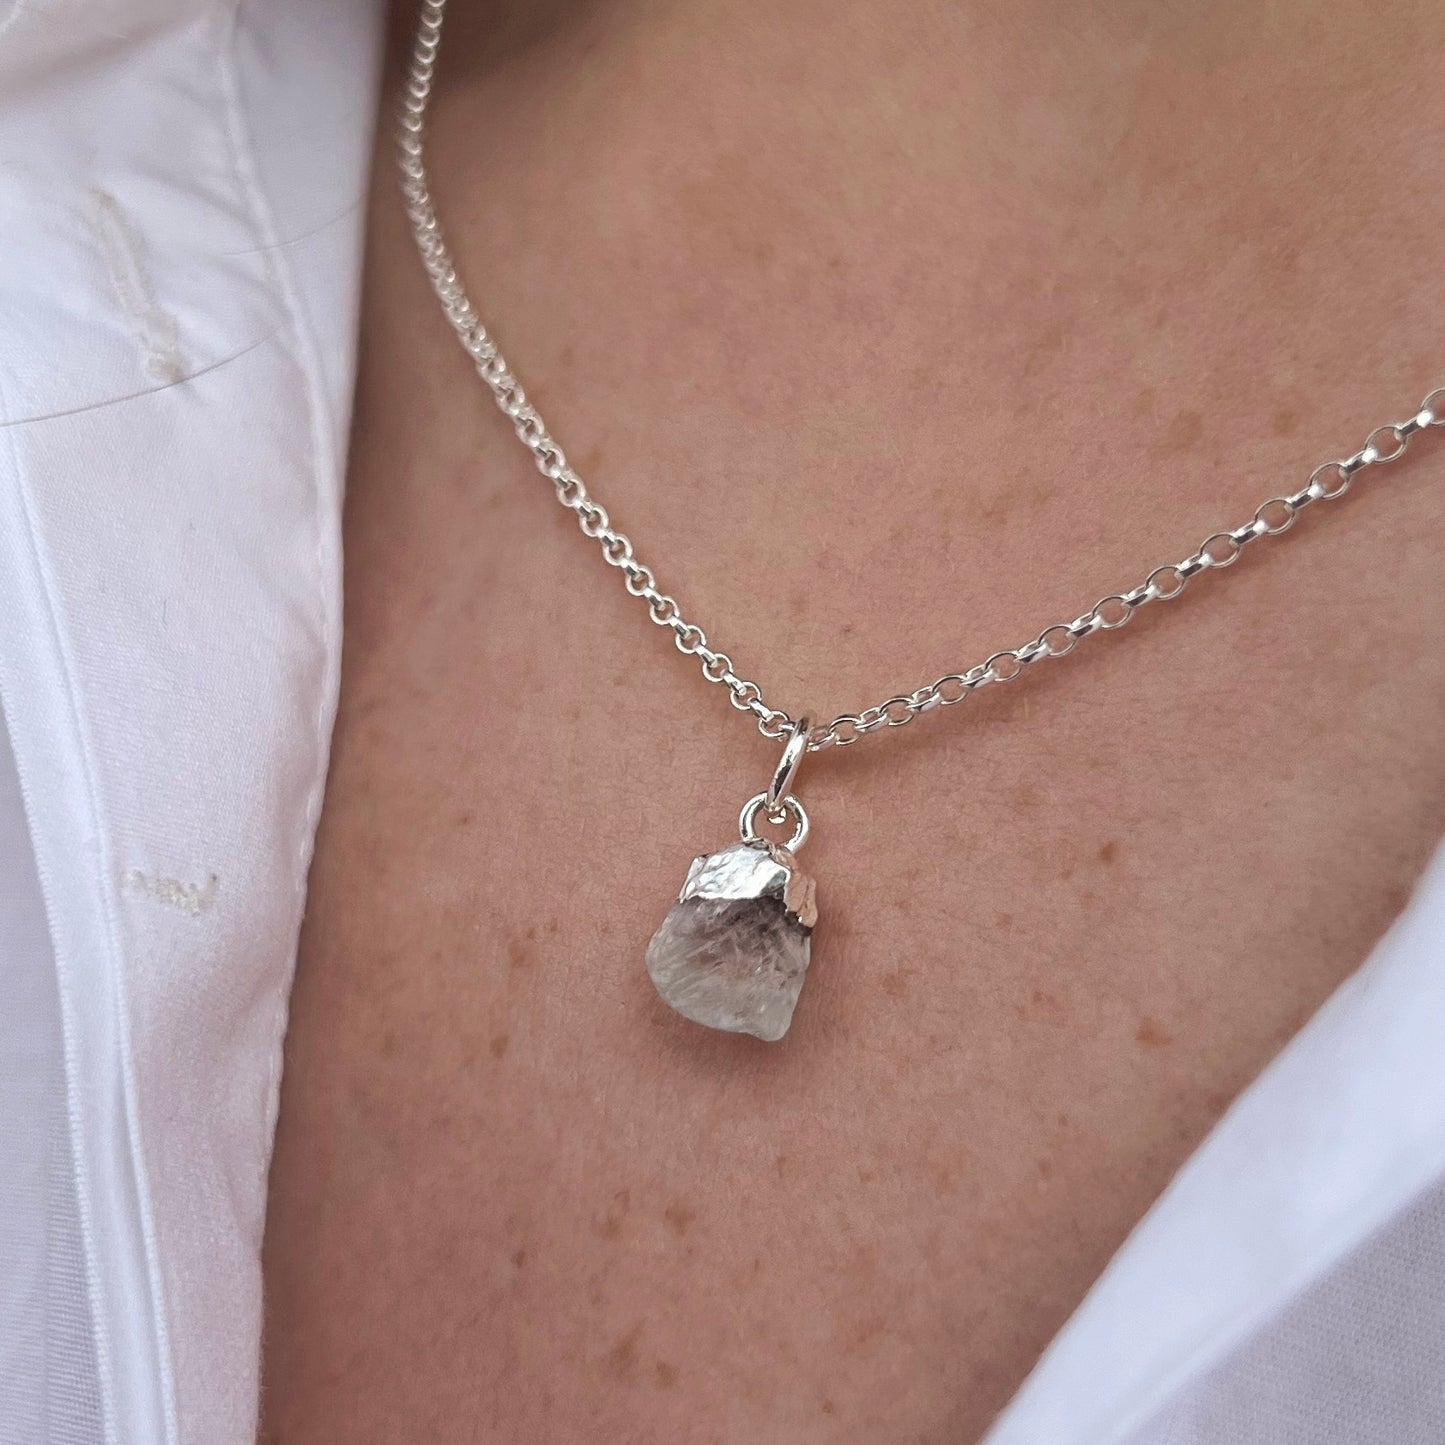 Moonstone Pendant Necklace - The Kristal Collection